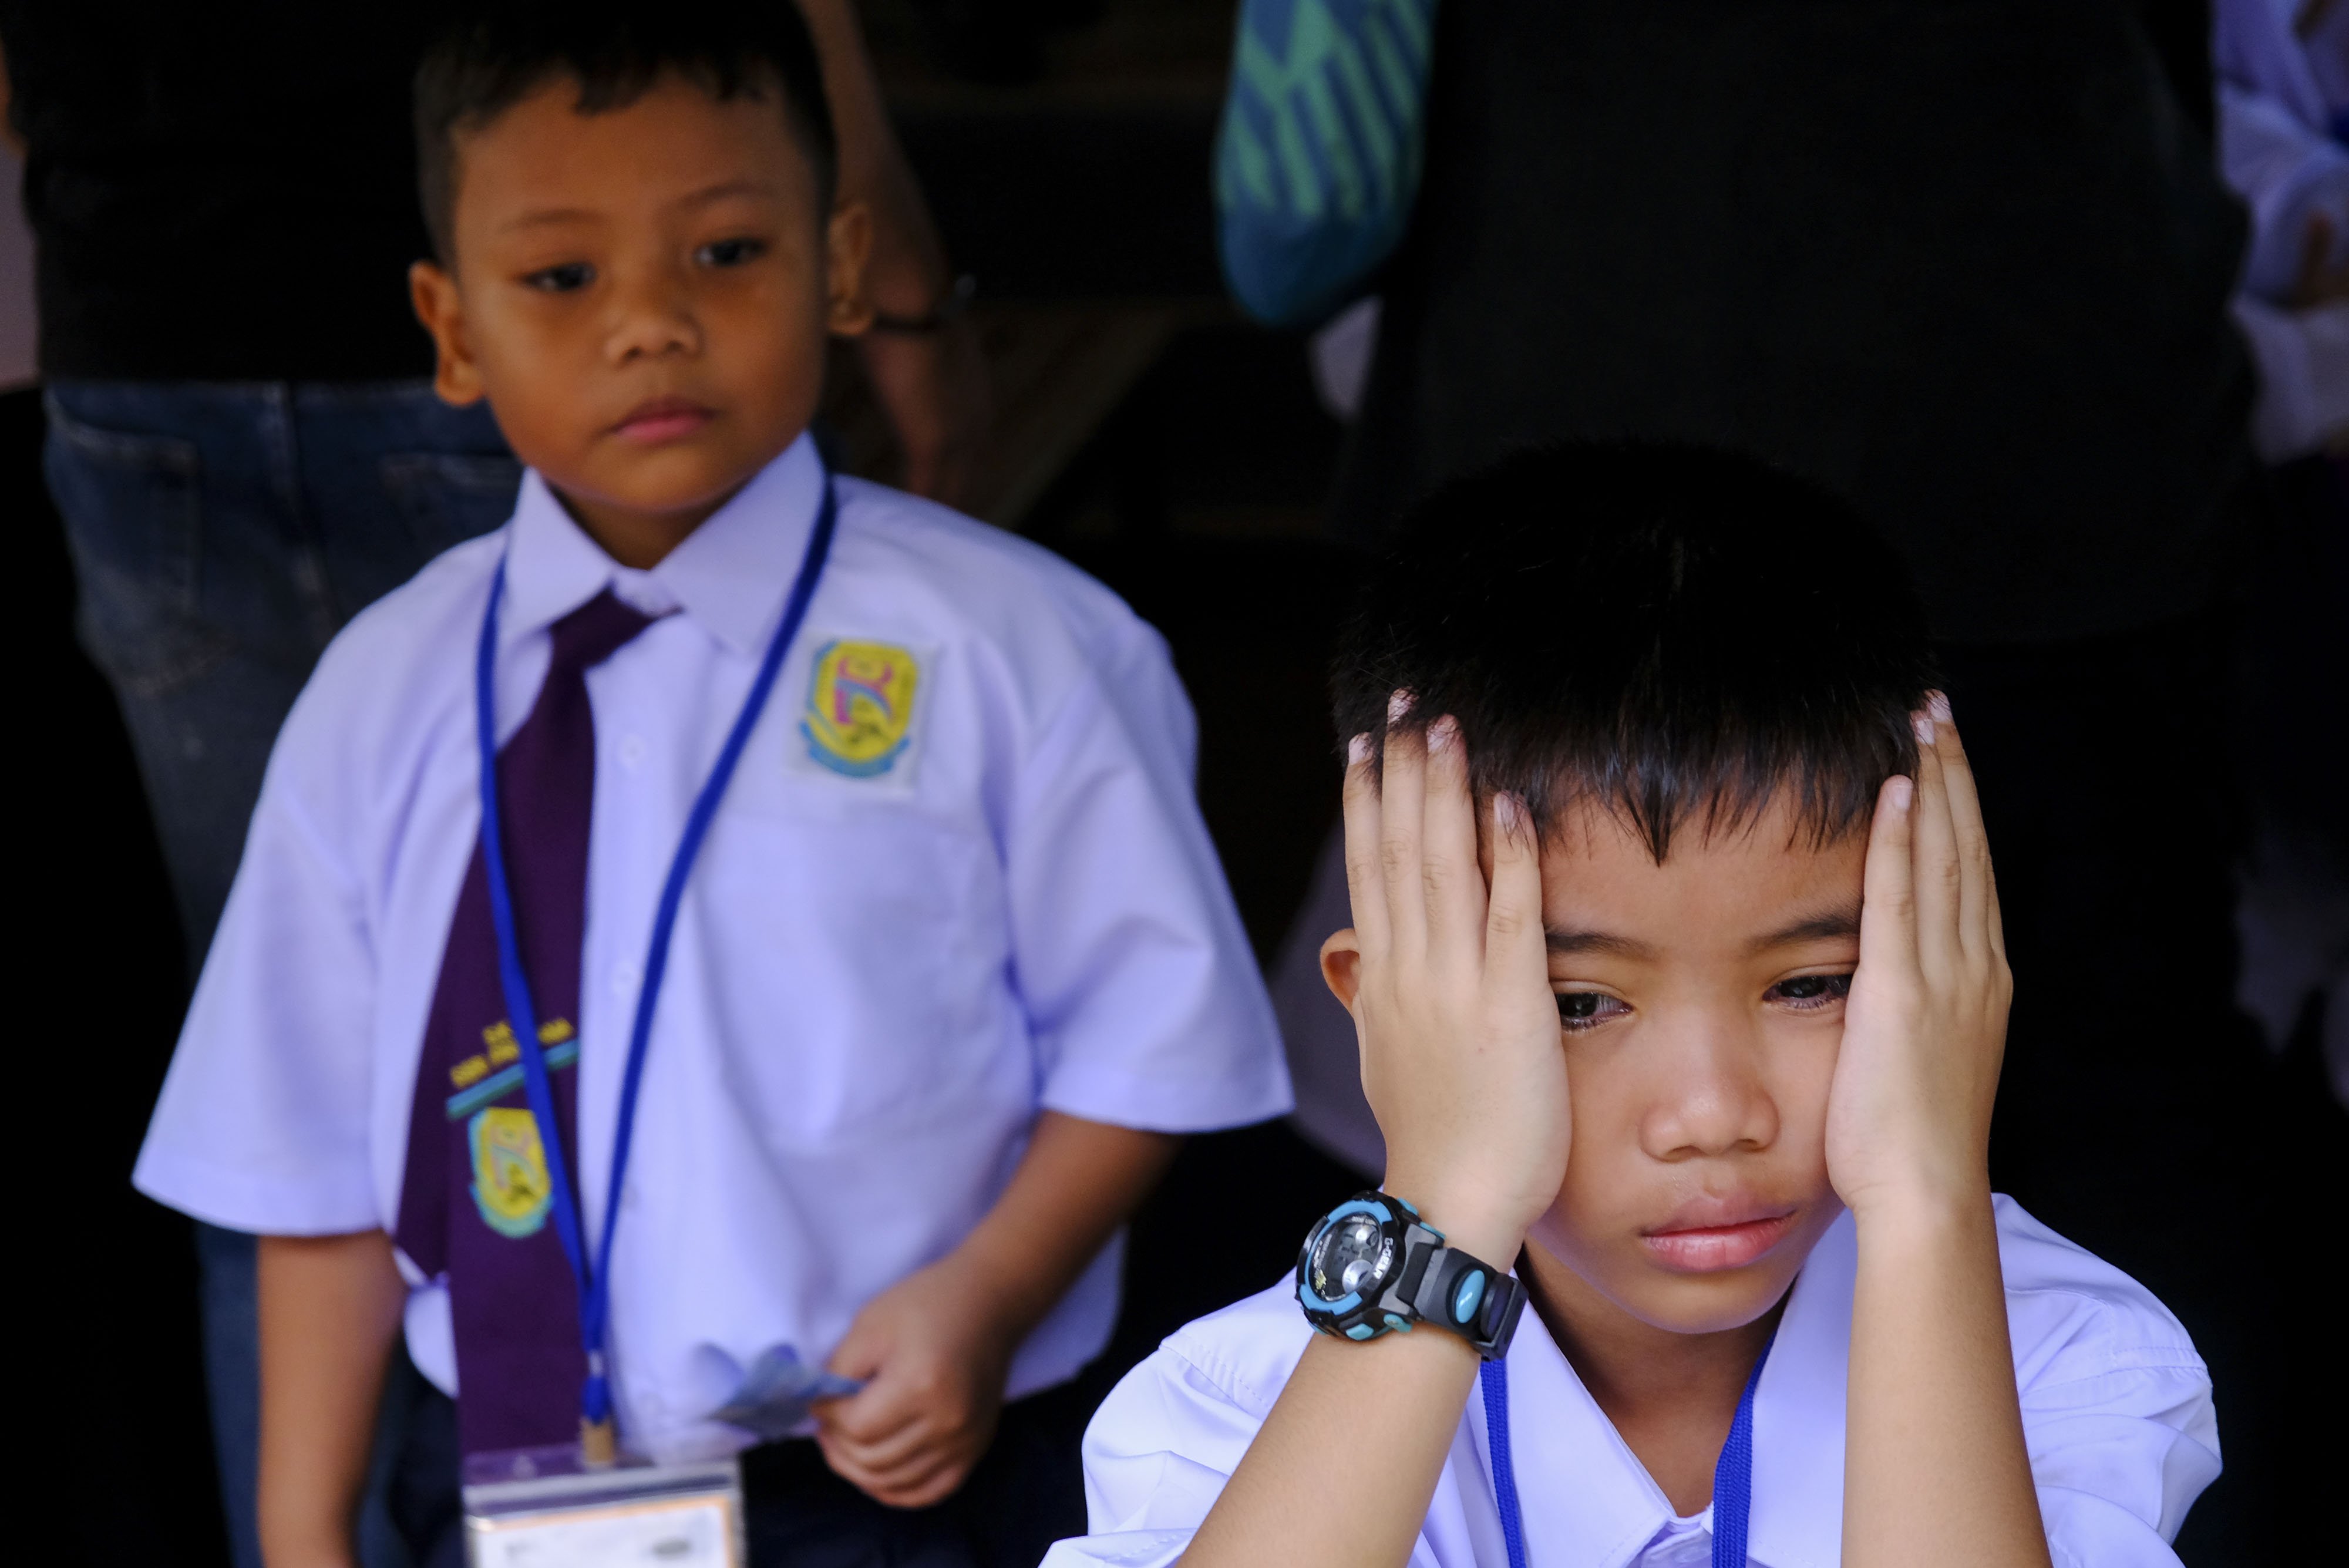 A year one pupil seen on the first day of school at Sk Seri Pristana. Malaysia school student have start their first day of school on 2th January 2020|Photo: Getty Images